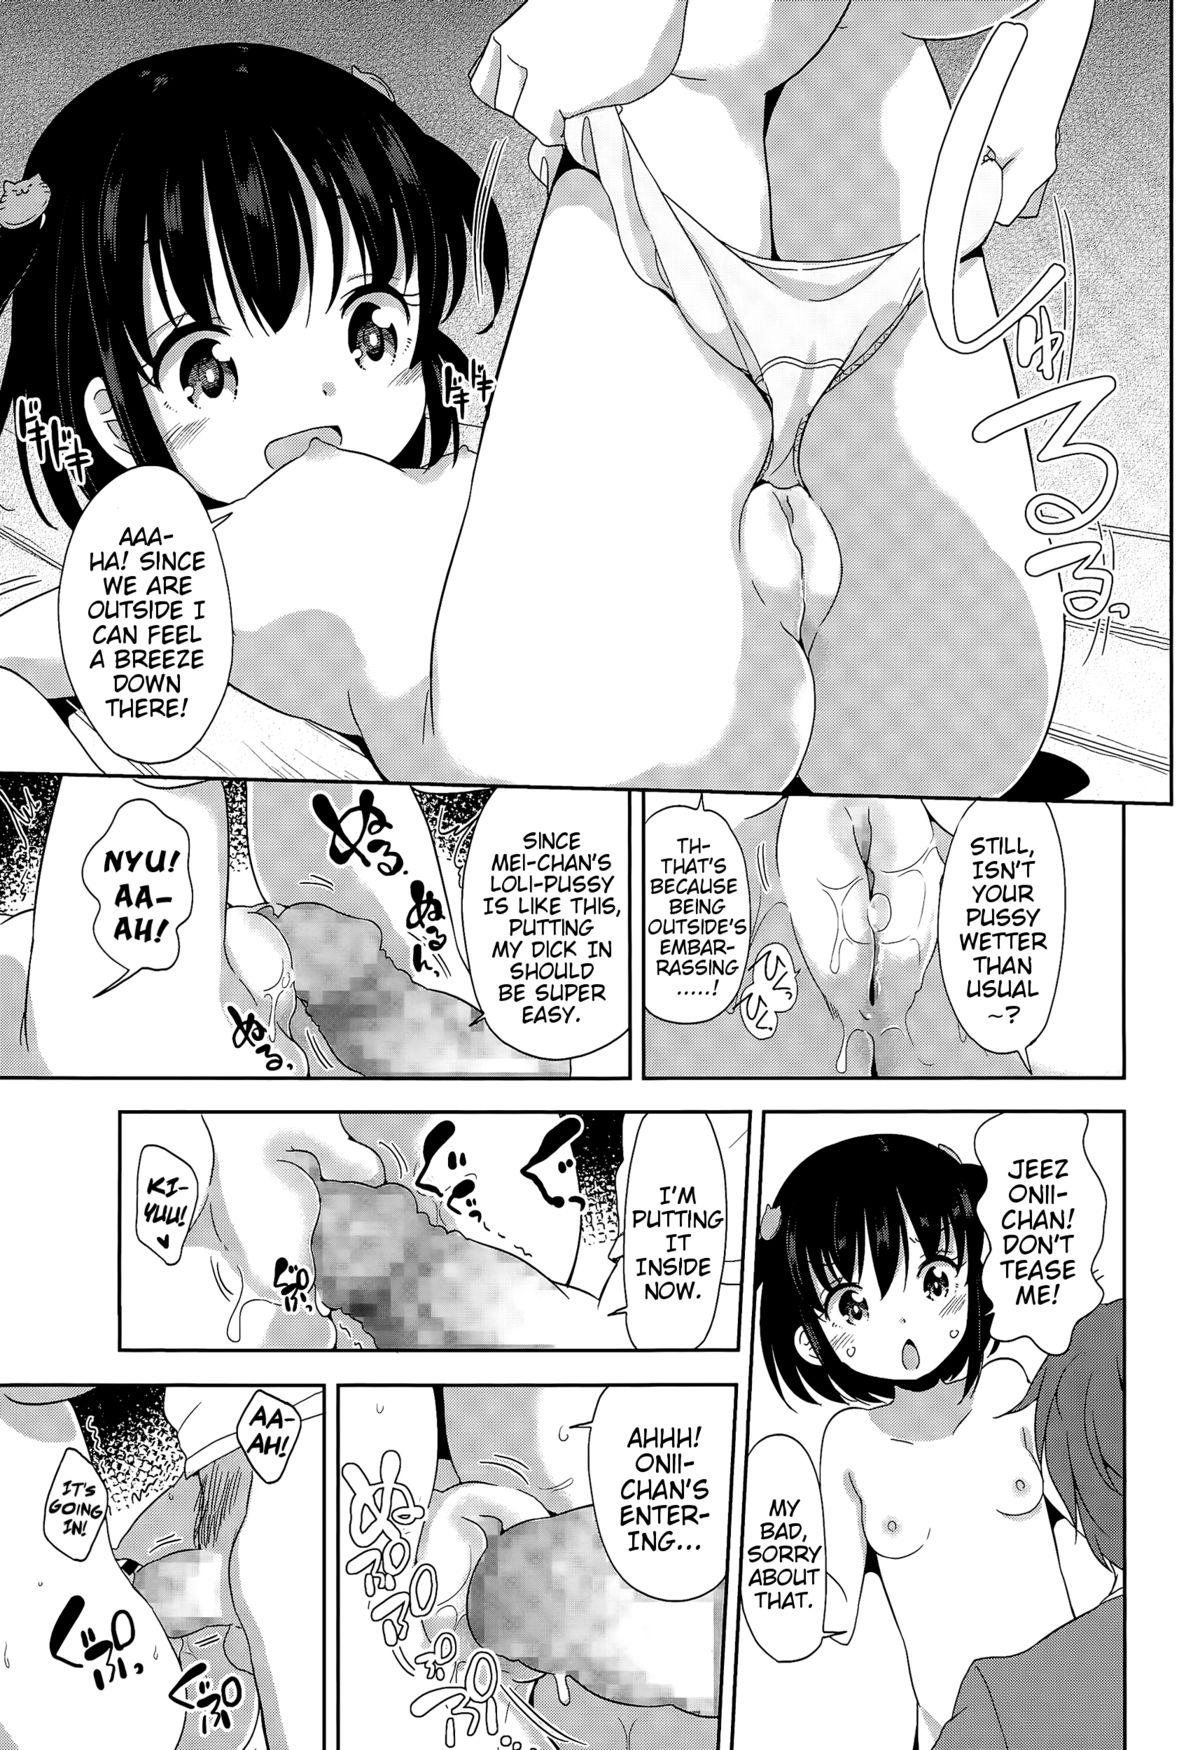 [Fuyuno Mikan] Mei-chan to Issho | Together With Mei-chan (COMIC LO 2015-07) [English] {Mistvern} 6